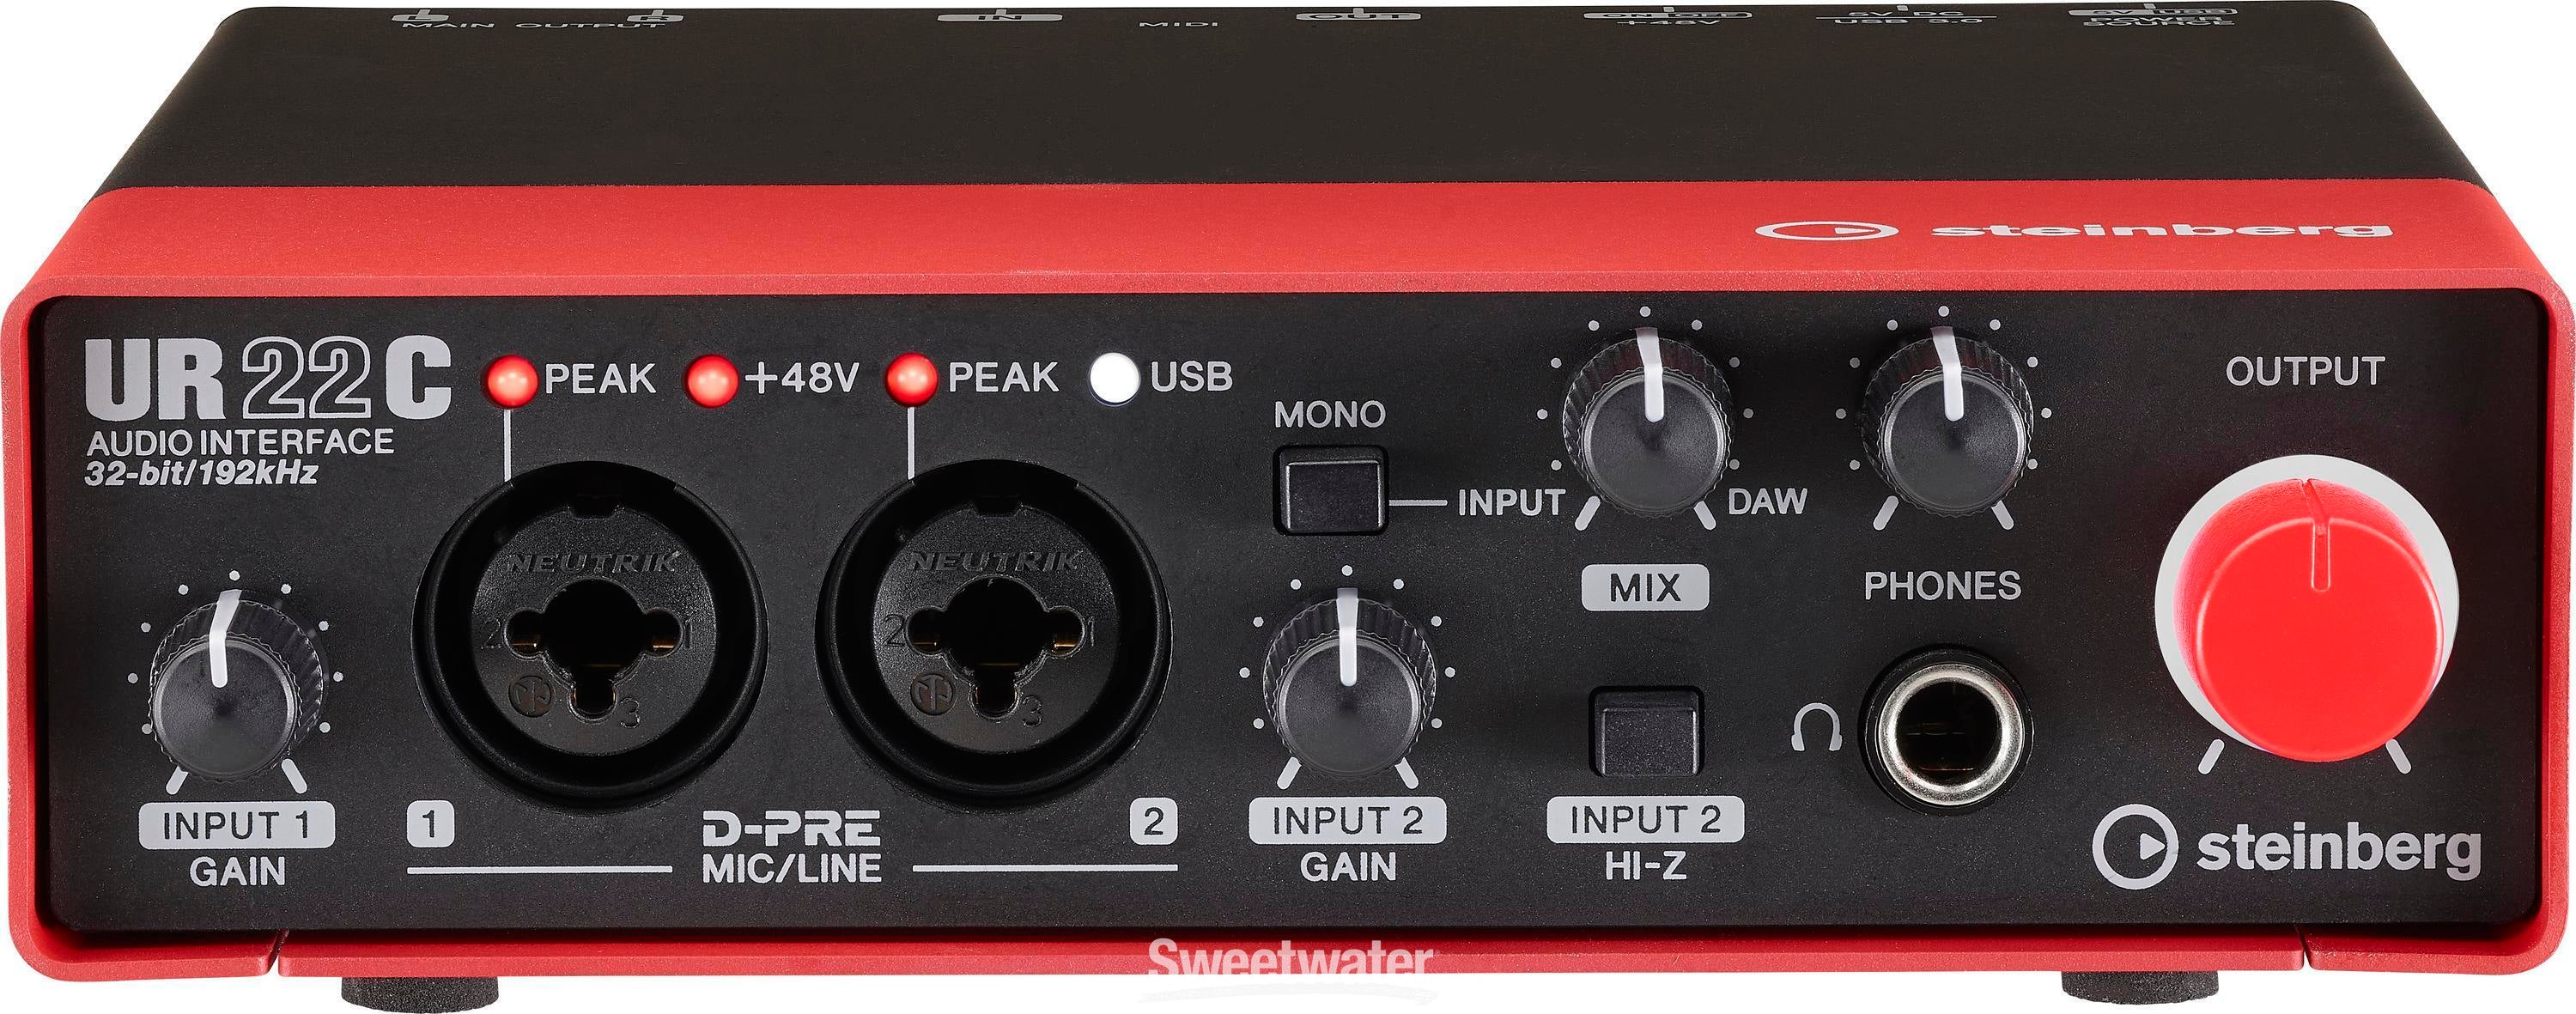 UR22C USB Audio Interface - Red - Sweetwater